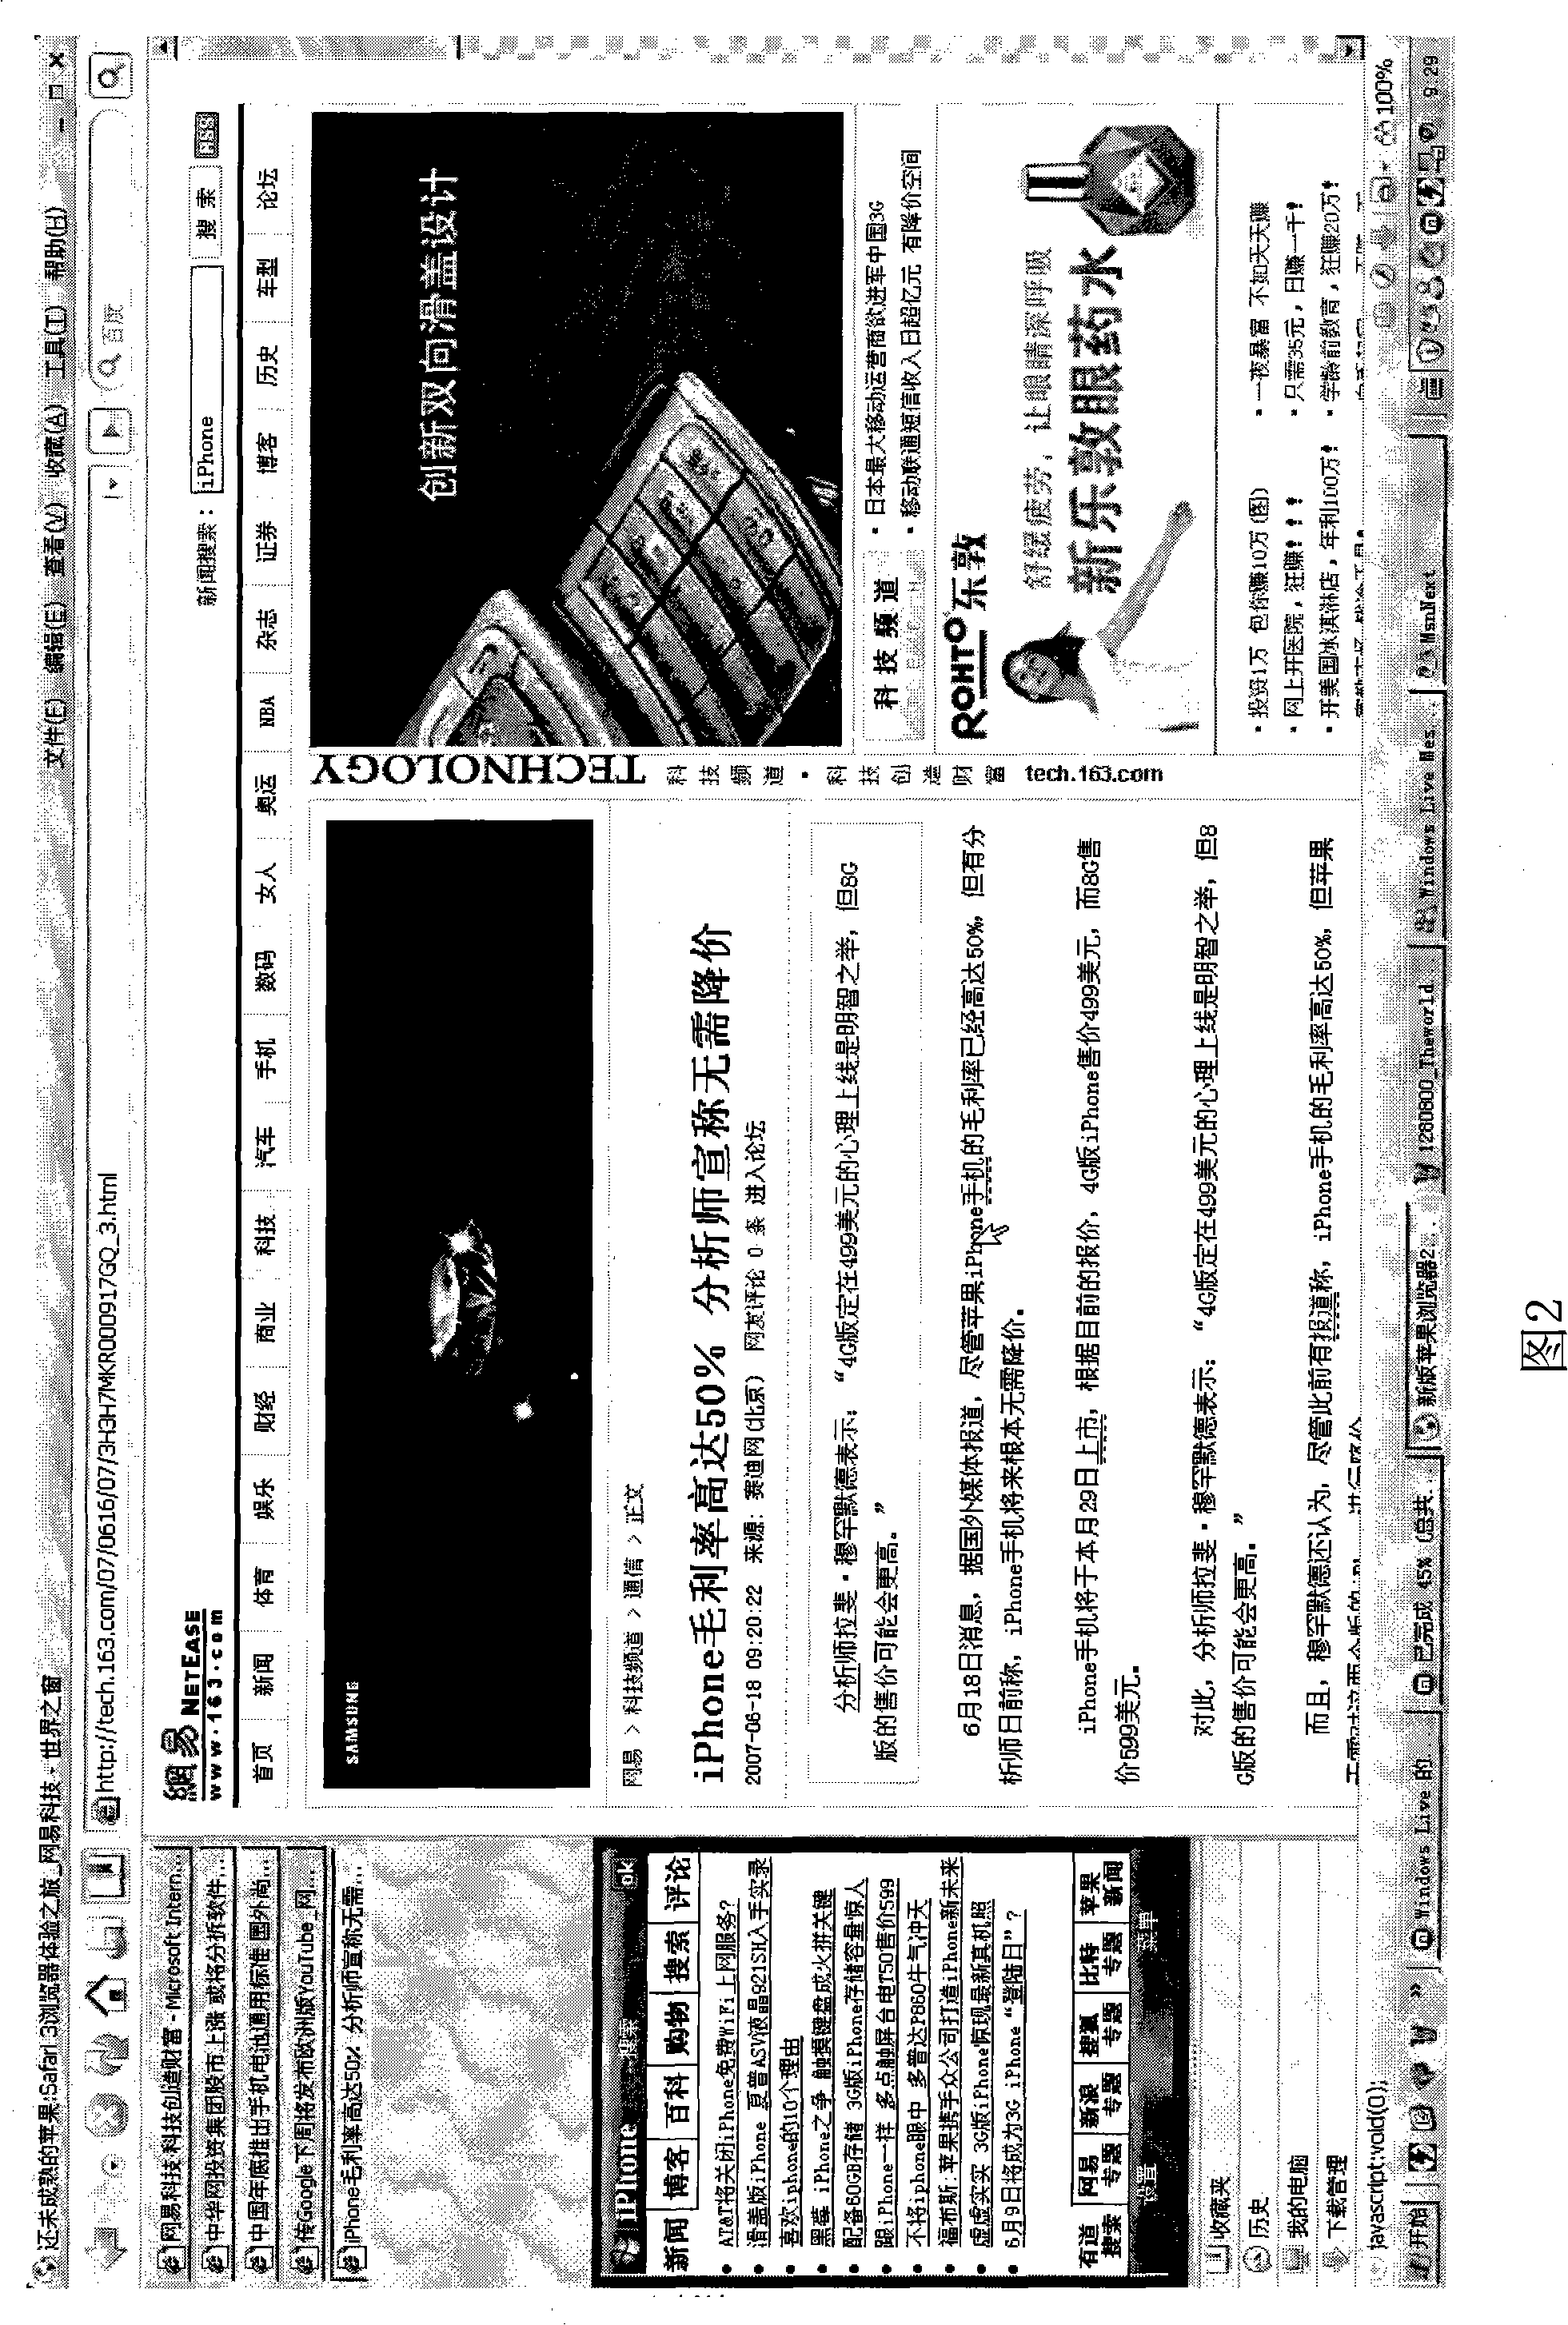 Method for on-line searching for computer screen displayed text character string